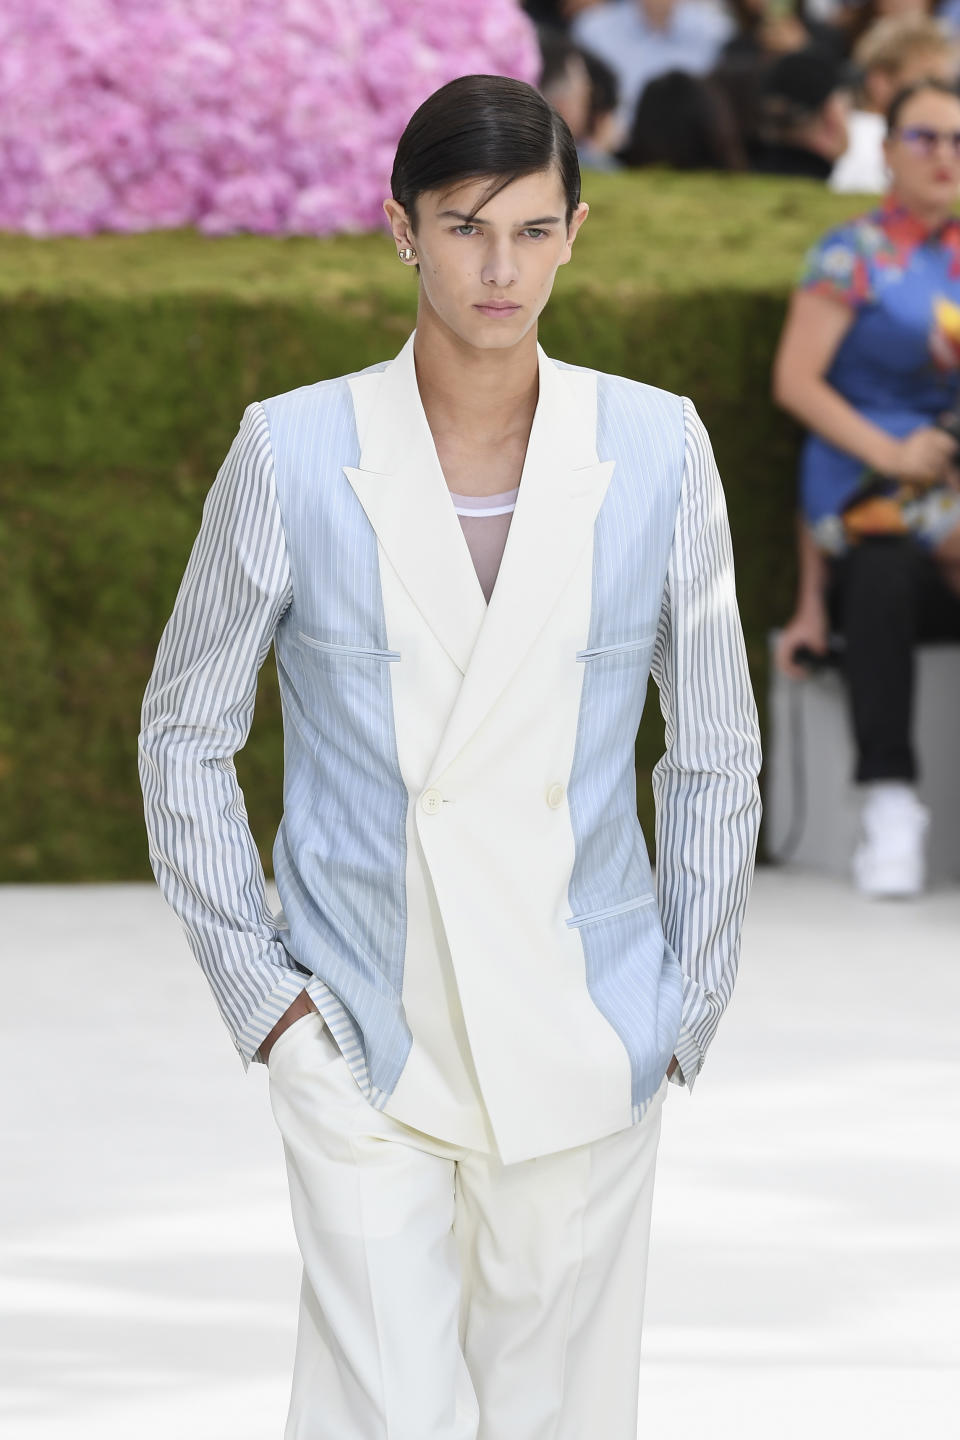 Nikolai is also a model and has walked runways for Burberry and Dior. Photo: Getty